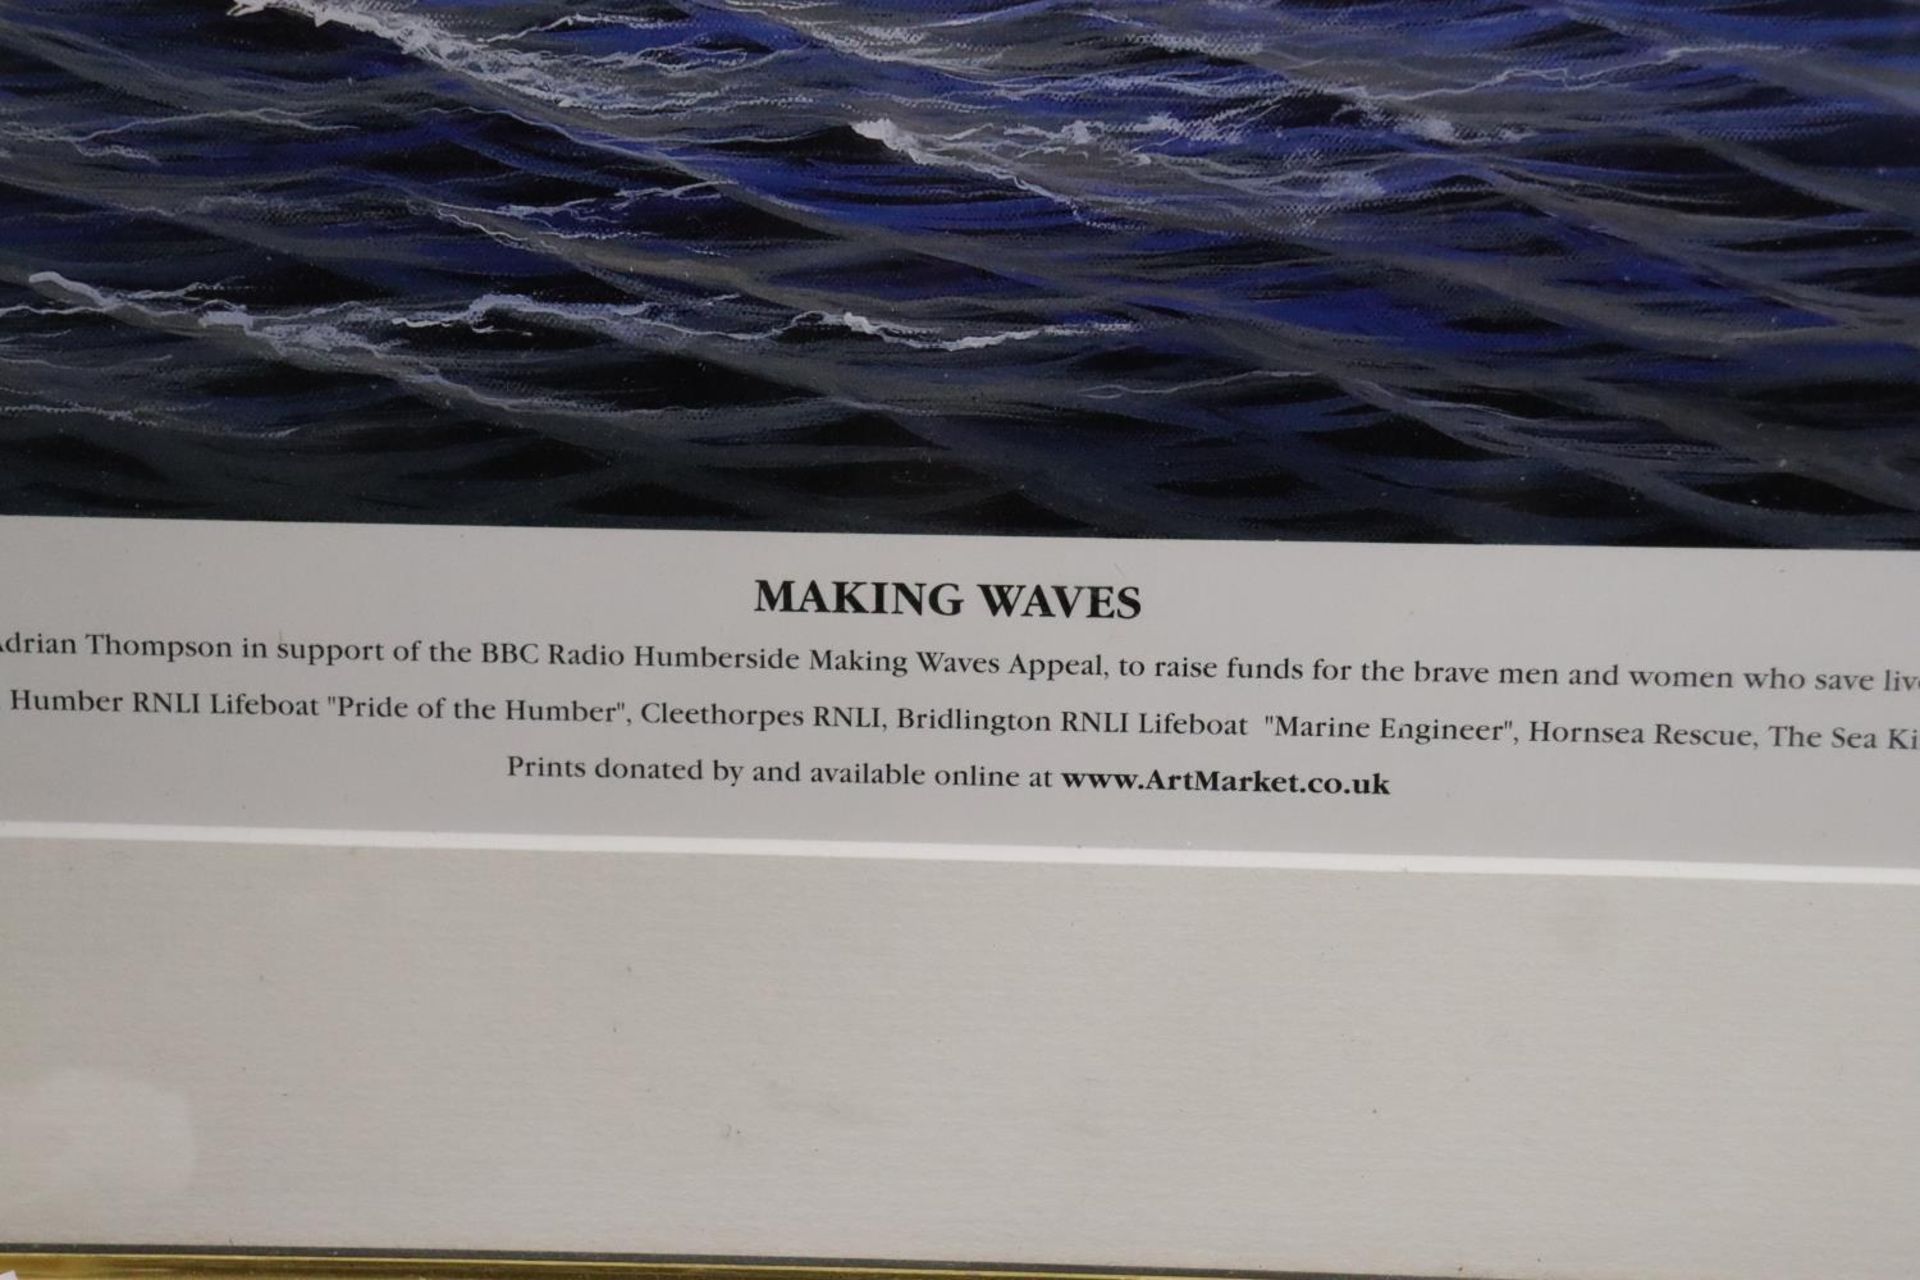 A FRAMED PRINT IN SUPPORT OF RADIO HUMBERSIDEMAKING WAVES APPEAL, SIGNED IN PENCIL BY NORMAN - Image 4 of 4